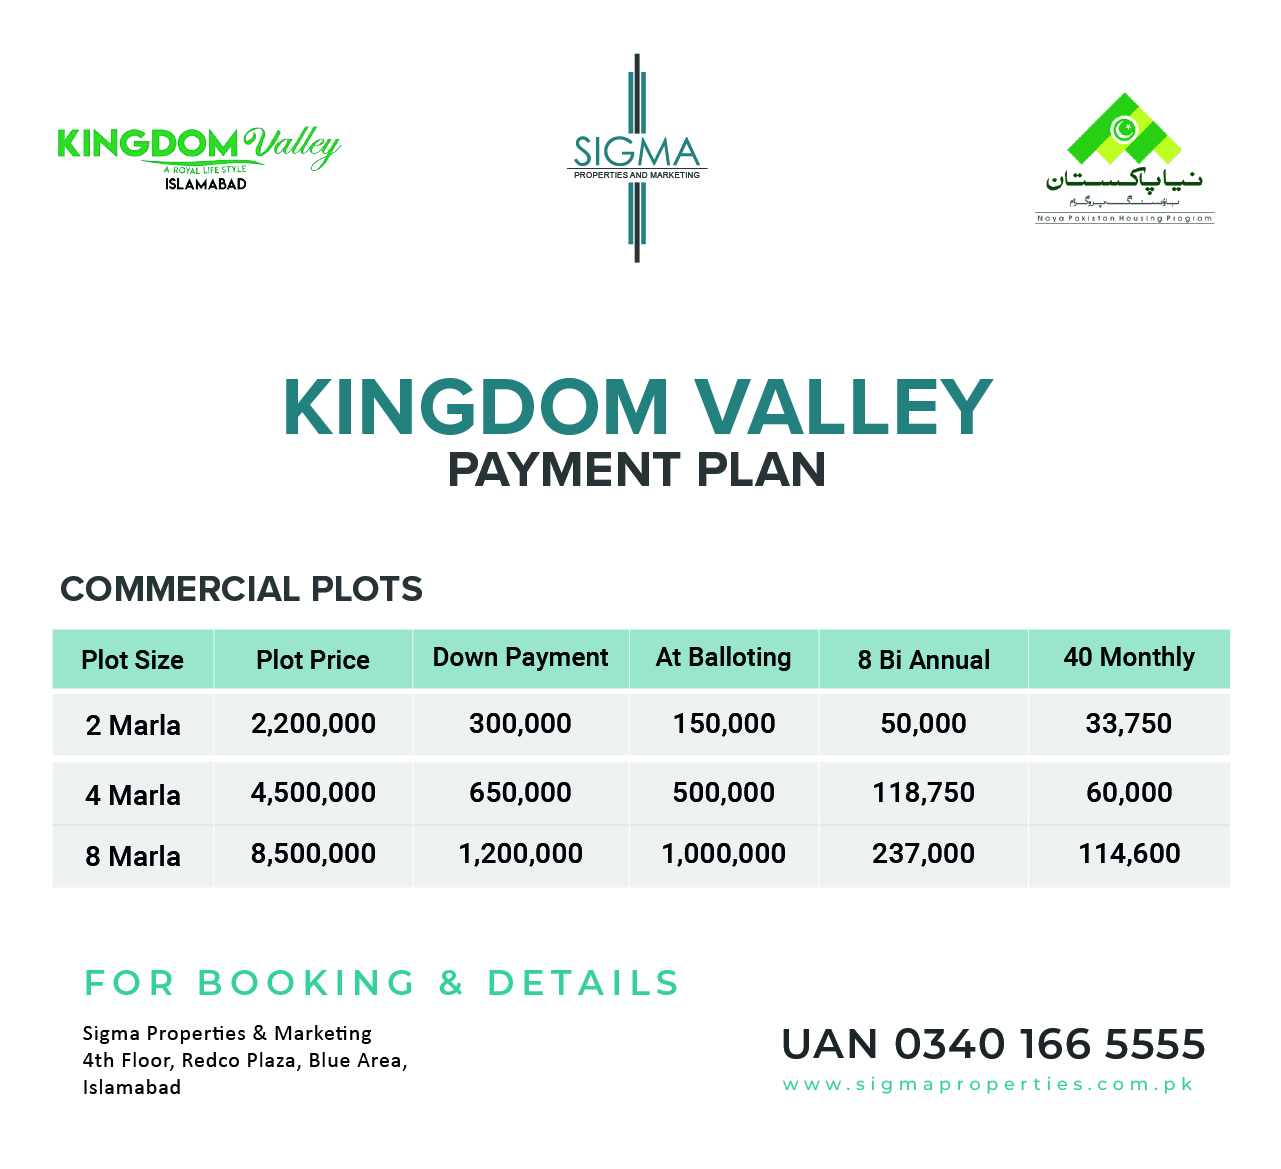 Kingdom Valley Commercial Plots Payment Plan